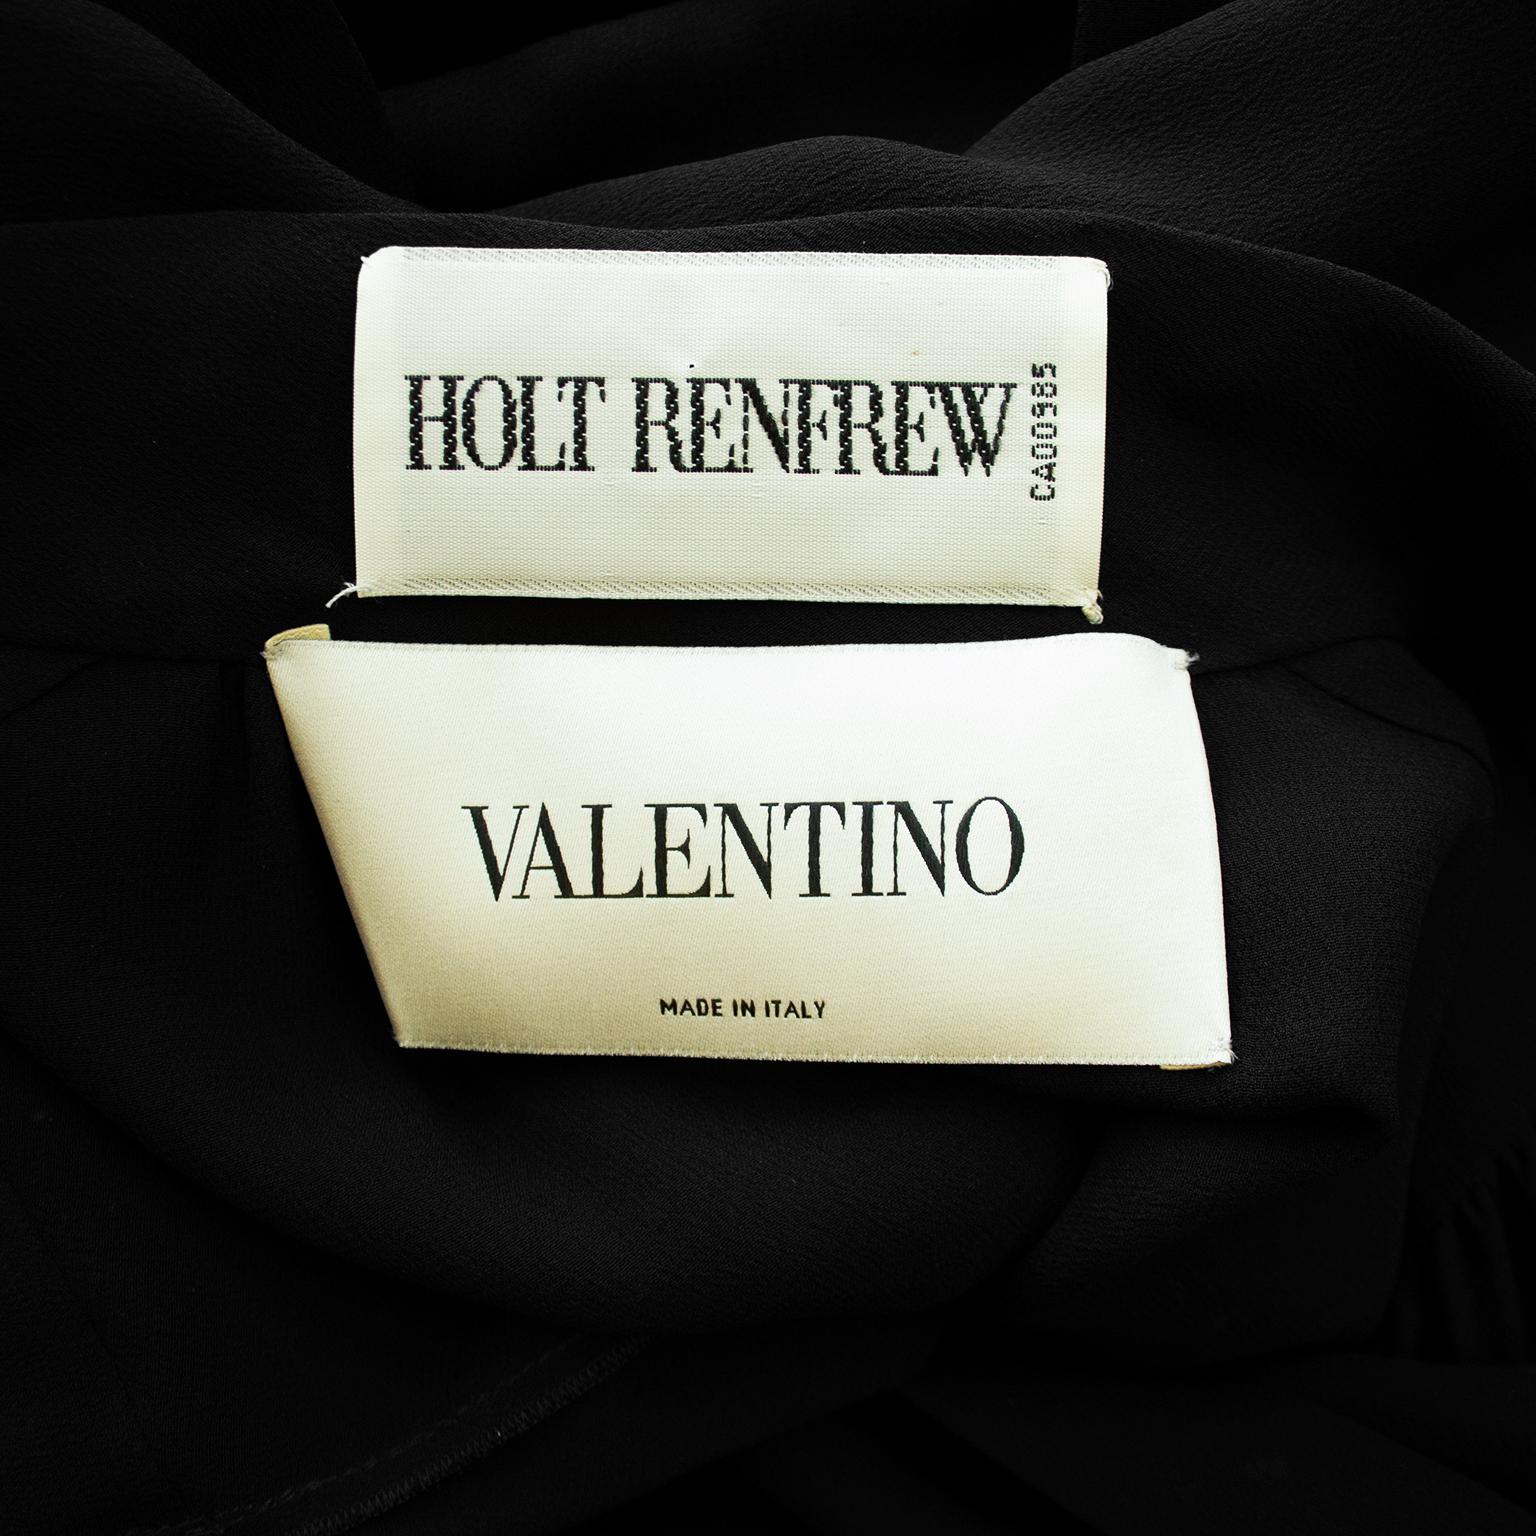 1990s Valentino Black Chiffon and Velvet Dress Shirt Dress In Good Condition For Sale In Toronto, Ontario